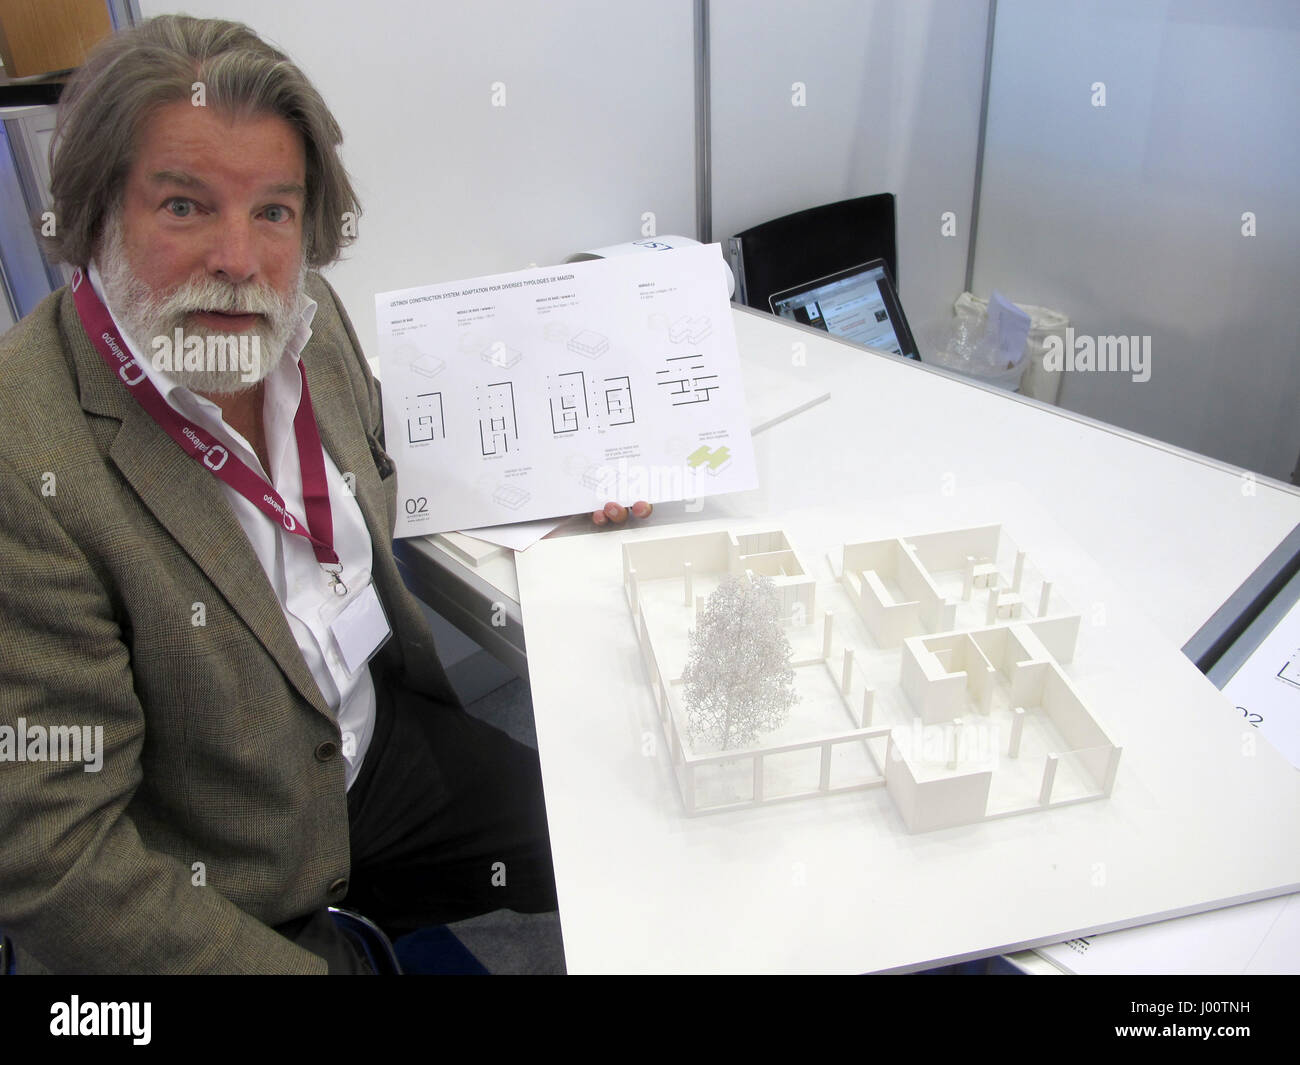 Geneva, Switzerland. 29th Mar, 2017. Igor Ustinov, son of the late actor Peter Ustinov, presents a construction system for pre-constructed houses made of recycled plastic bottles at the Inventions fair in Geneva, Switzerland, 29 March 2017. Photo: Christiane Oelrich/dpa/Alamy Live News Stock Photo